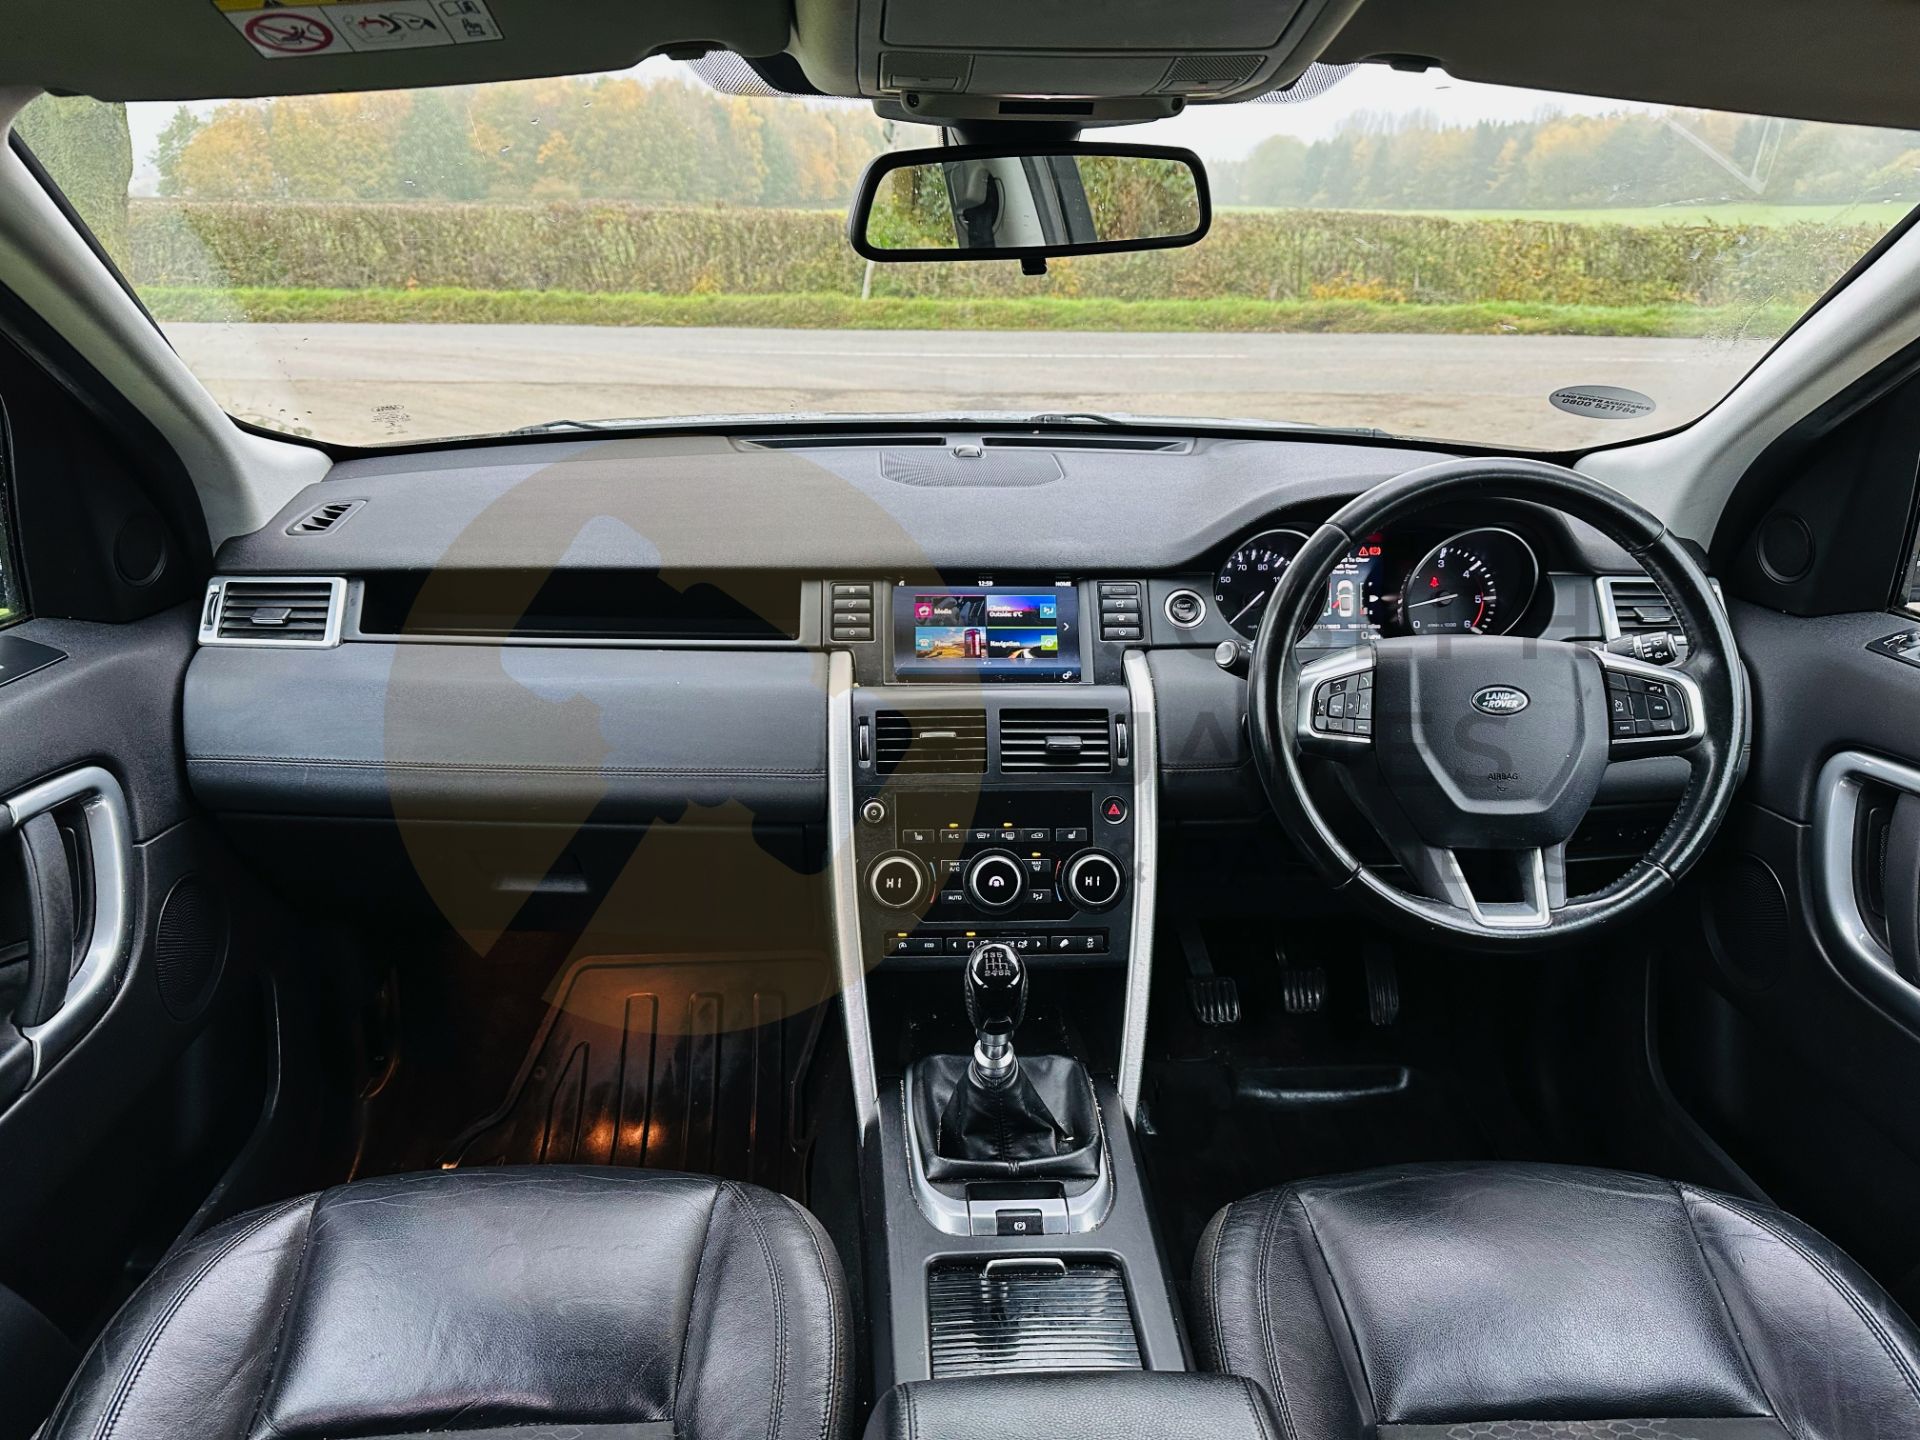 (ON SALE) LAND ROVER DISCOVERY SPORT *SE TECH* 2017 MODEL - FULL SERVICE HISTORY -1 OWNER - NO VAT!! - Image 24 of 43